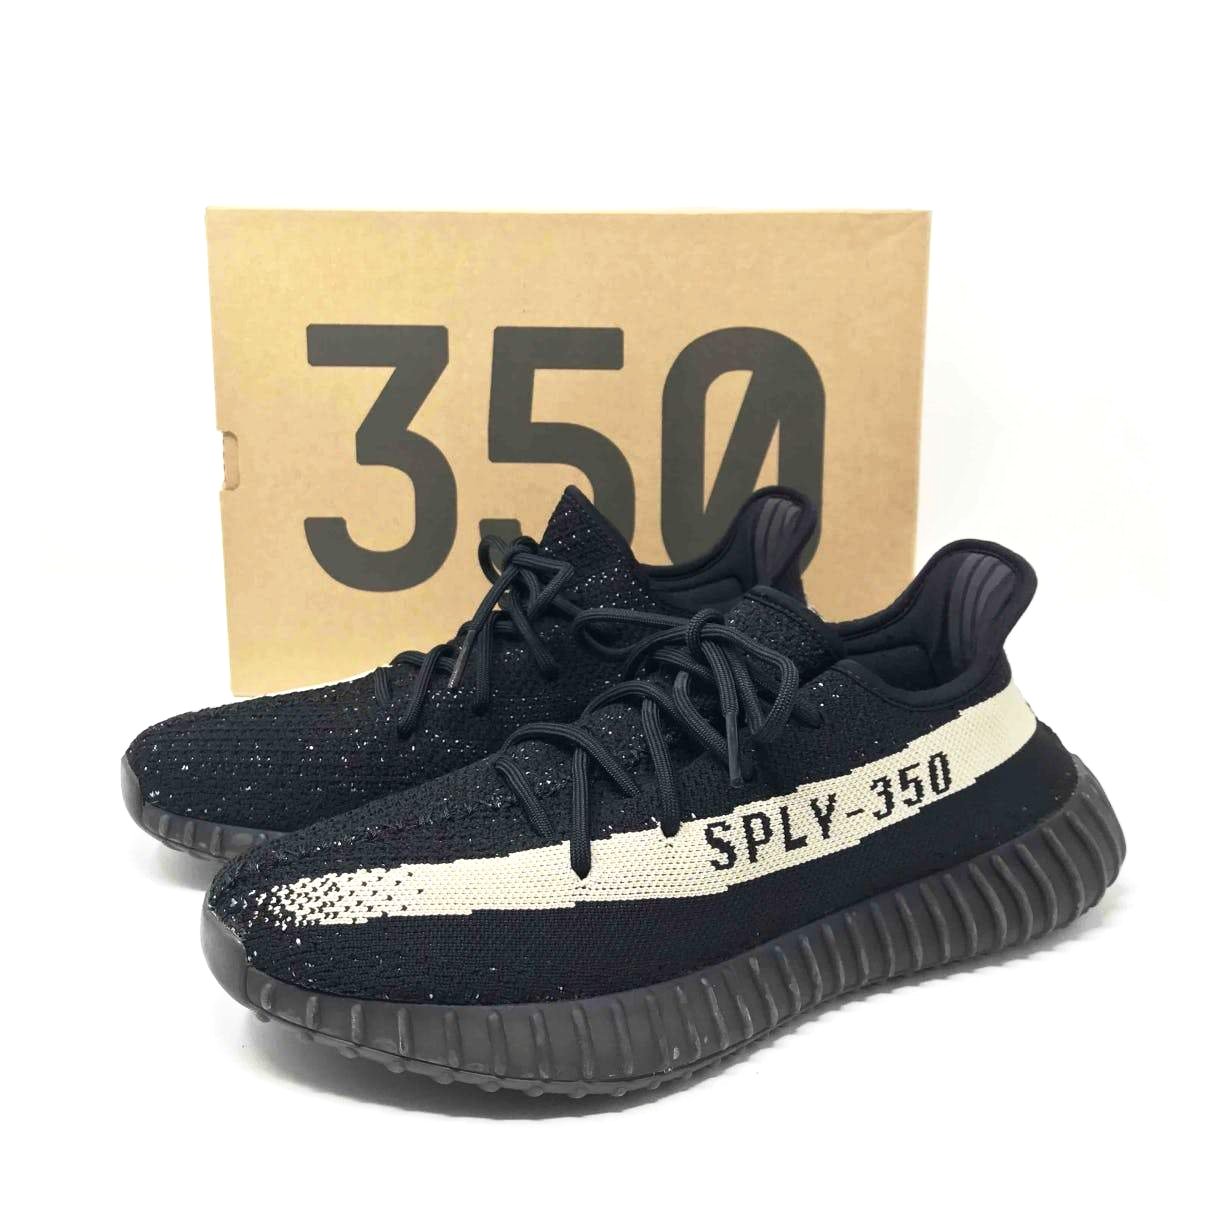 Yeezy X Adidas Boost 350 Sneakers in 